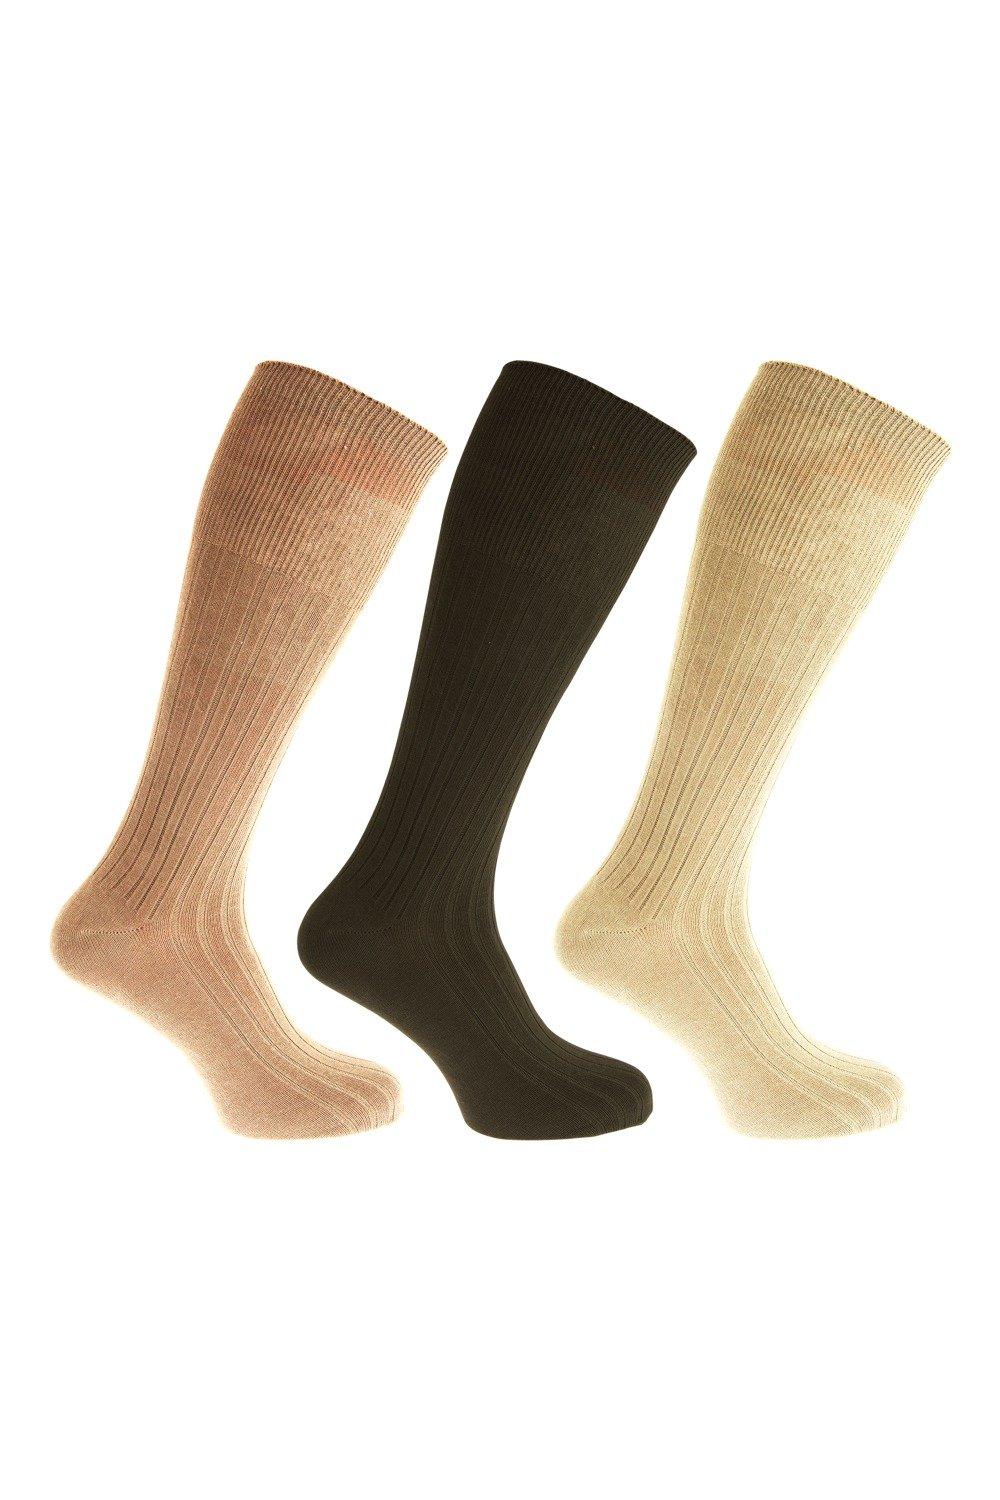 100% Cotton Ribbed Knee High Socks (Pack Of 3)